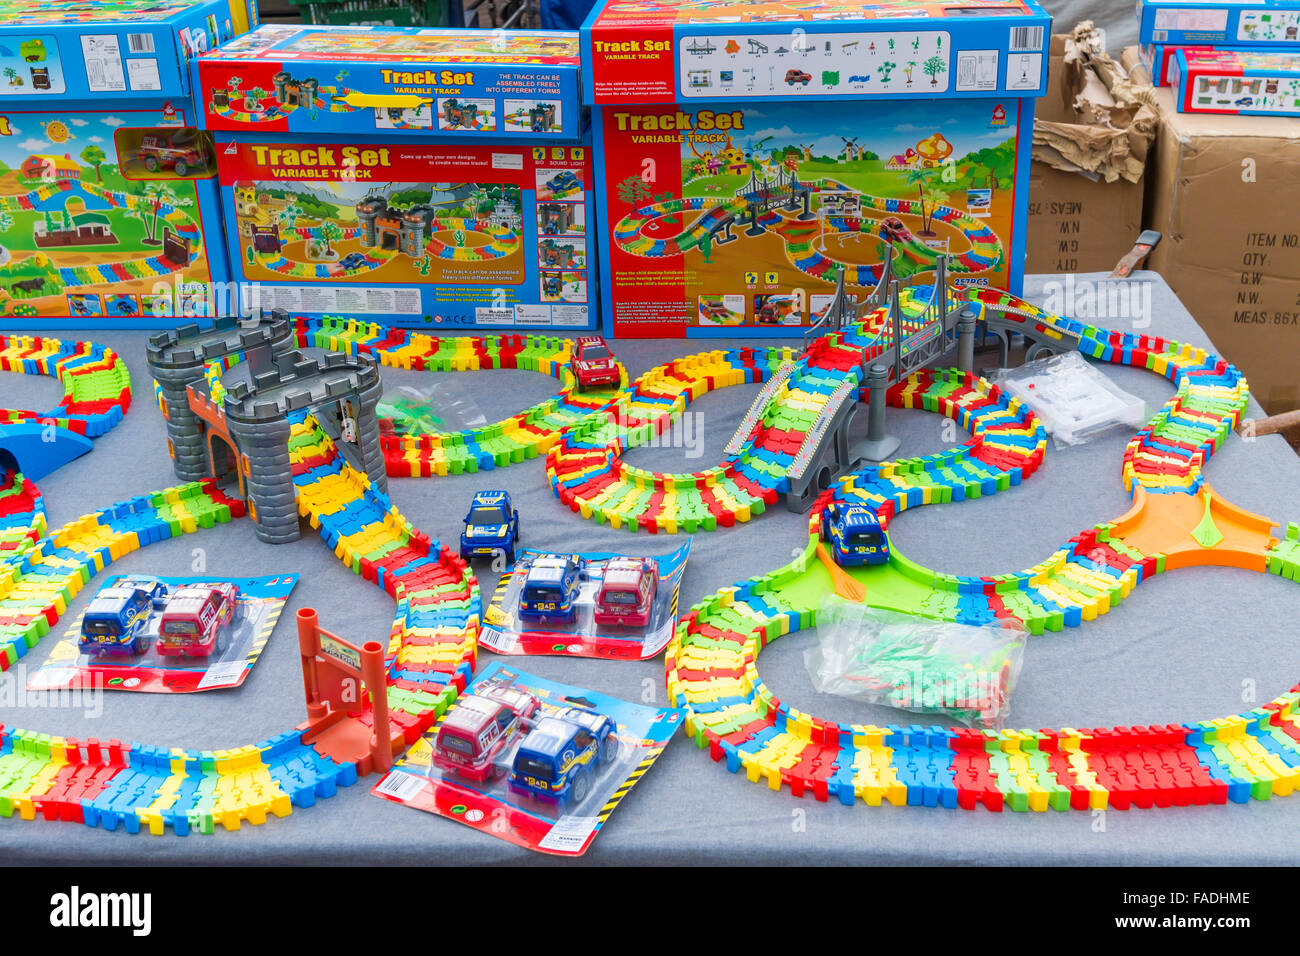 Market stall display of Children's toys Track Set variable layout and battery powered cars Stock Photo